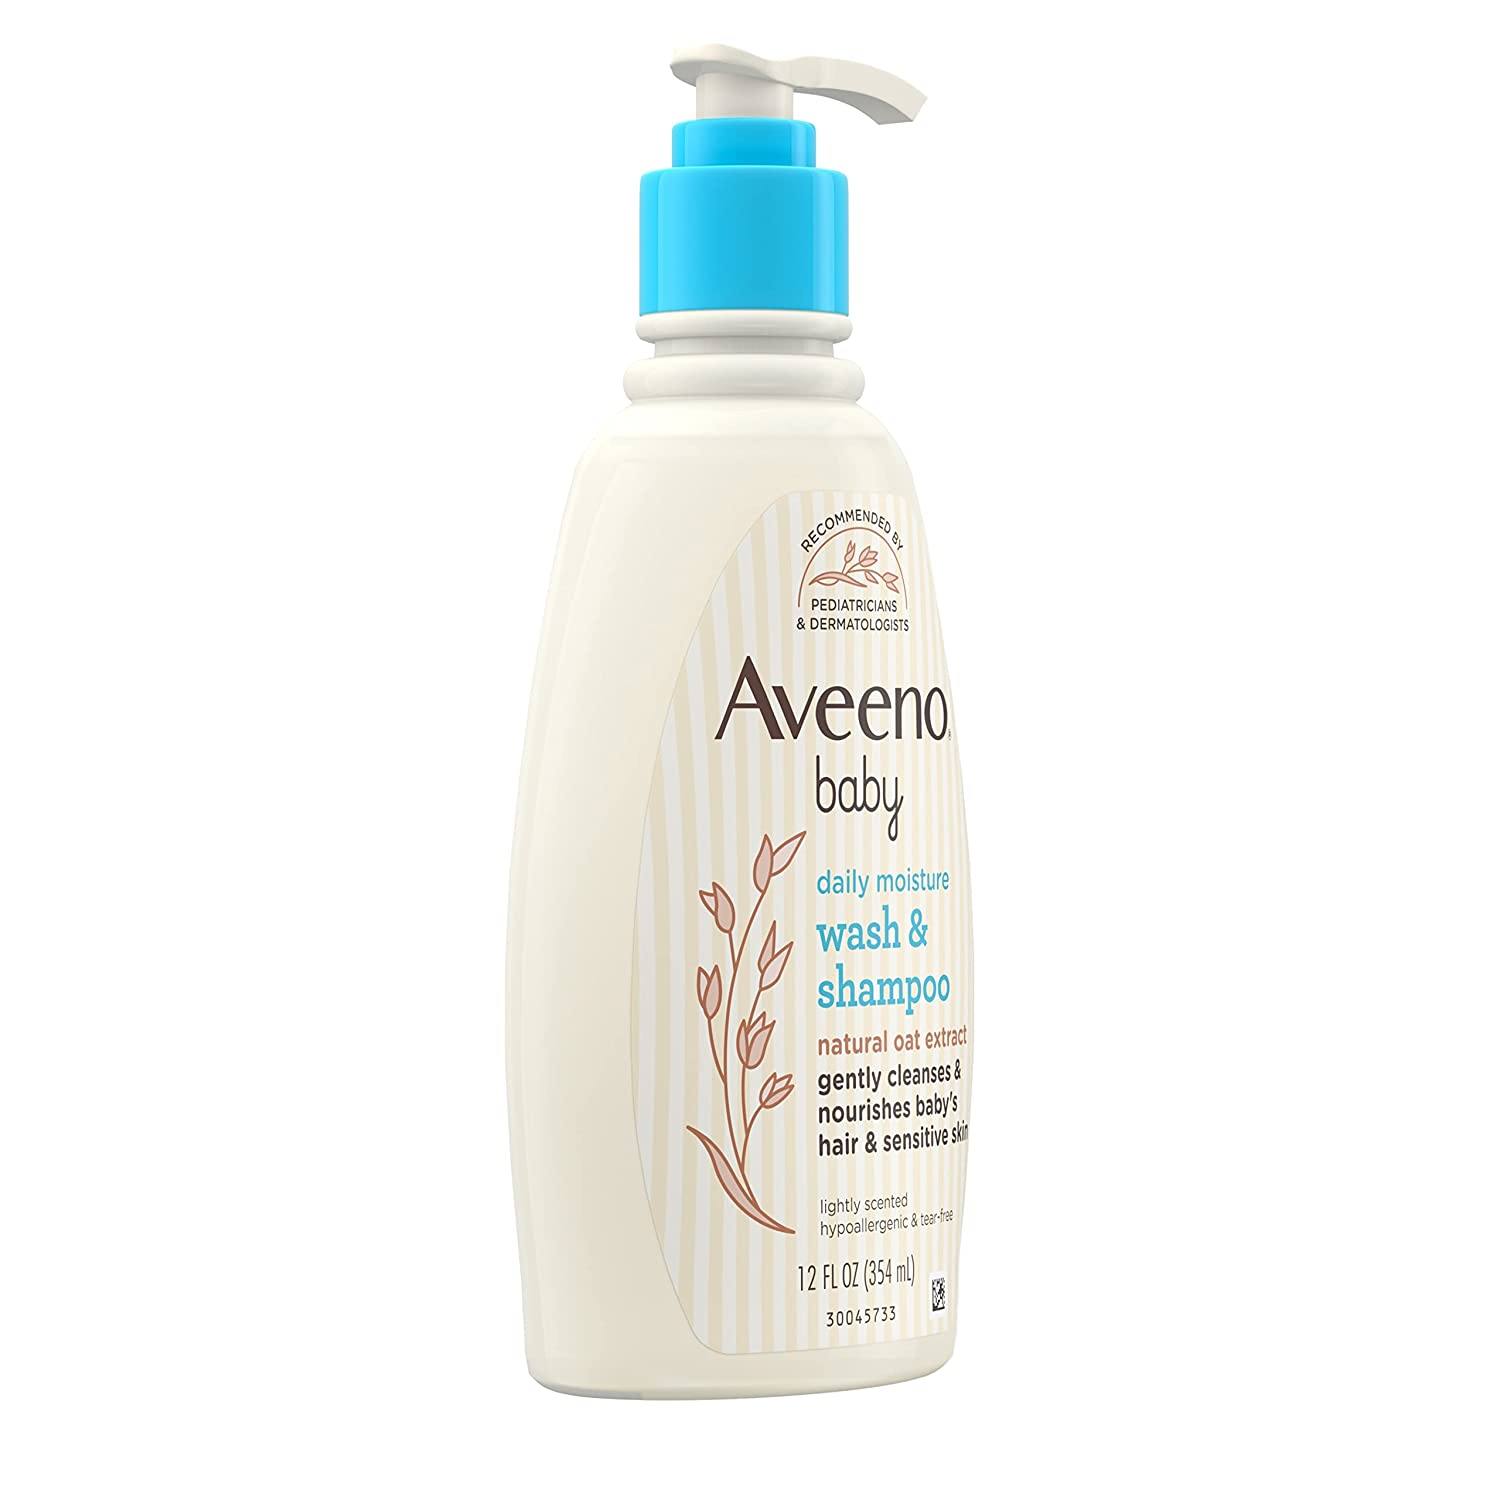 Aveeno Baby Daily Moisture Wash and Shampoo with Oat Extract Gentle on Hair & Skin 354 ml